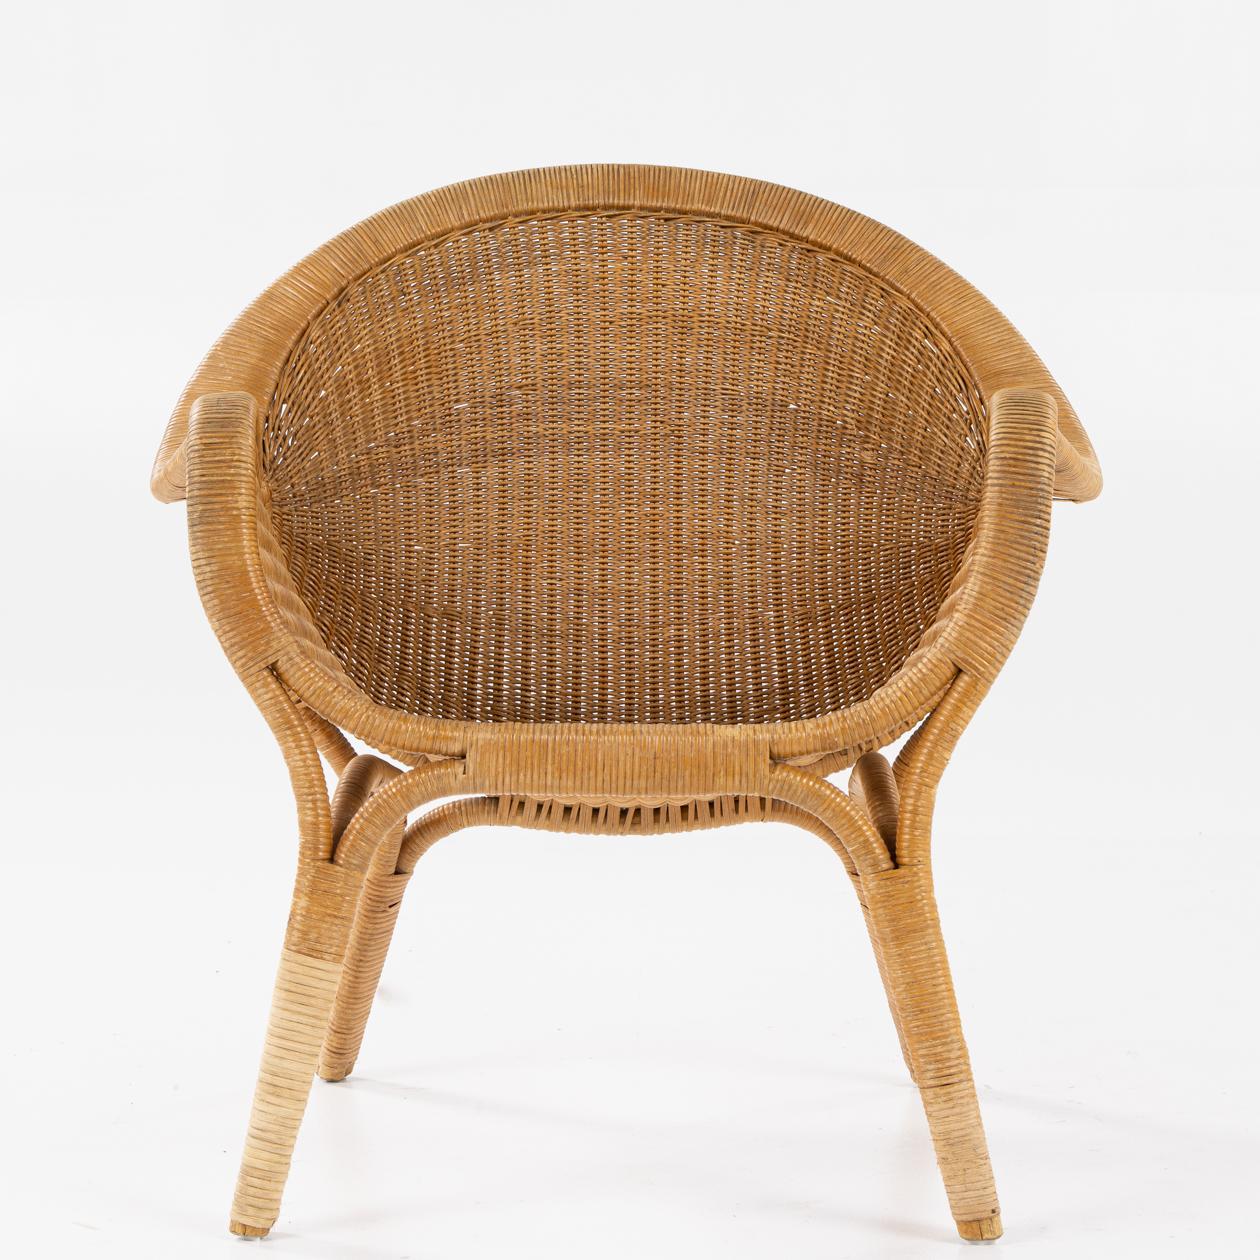 'Madame' armchair in bamboo and woven cane. Designed 1951. Nanna Ditzel / Wengler